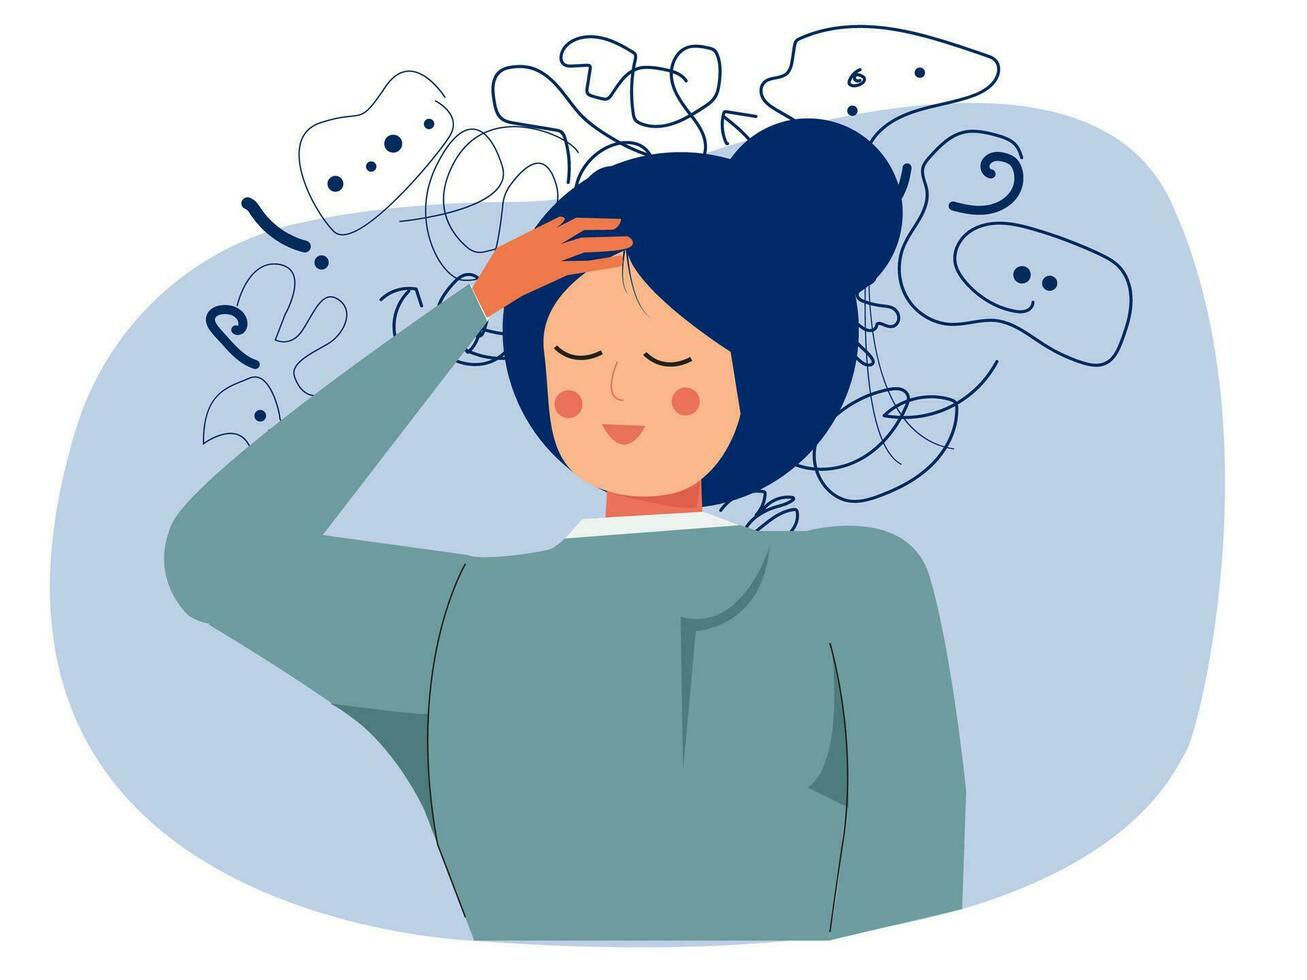 woman suffers from obsessive thoughts headache unresolved issues psychological trauma depression. Mental stress panic mind disorder illustration Flat vector illustration.